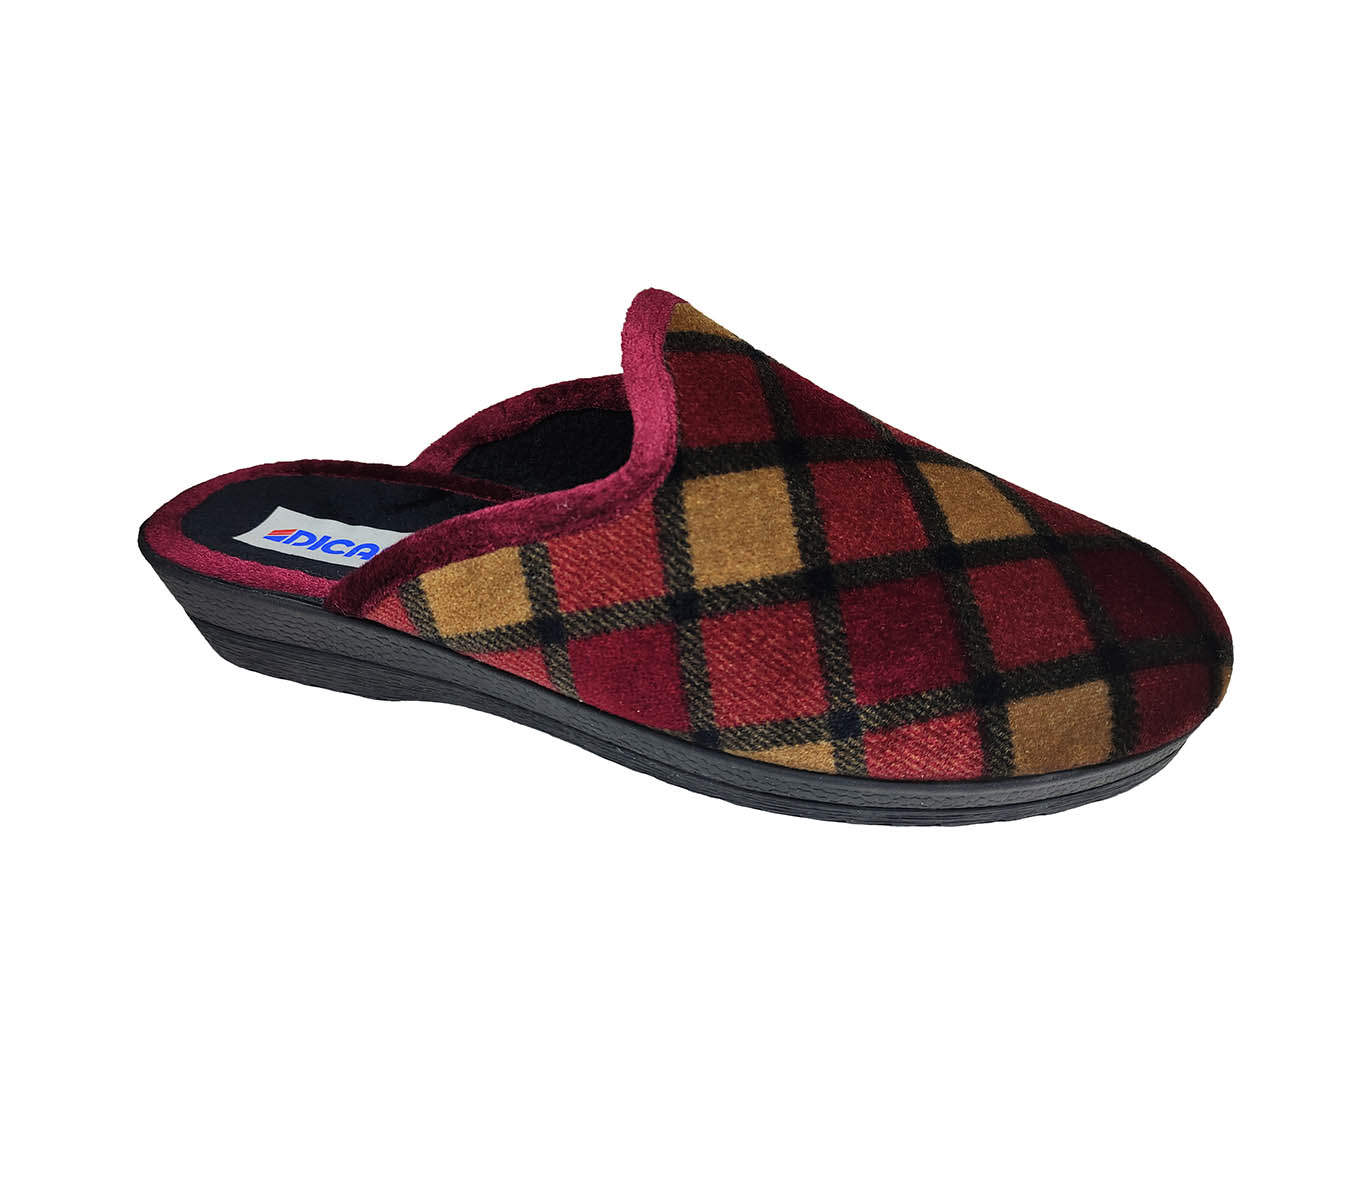 Womens Winter Slippers Dicas 4856 Bordeaux/Checkered